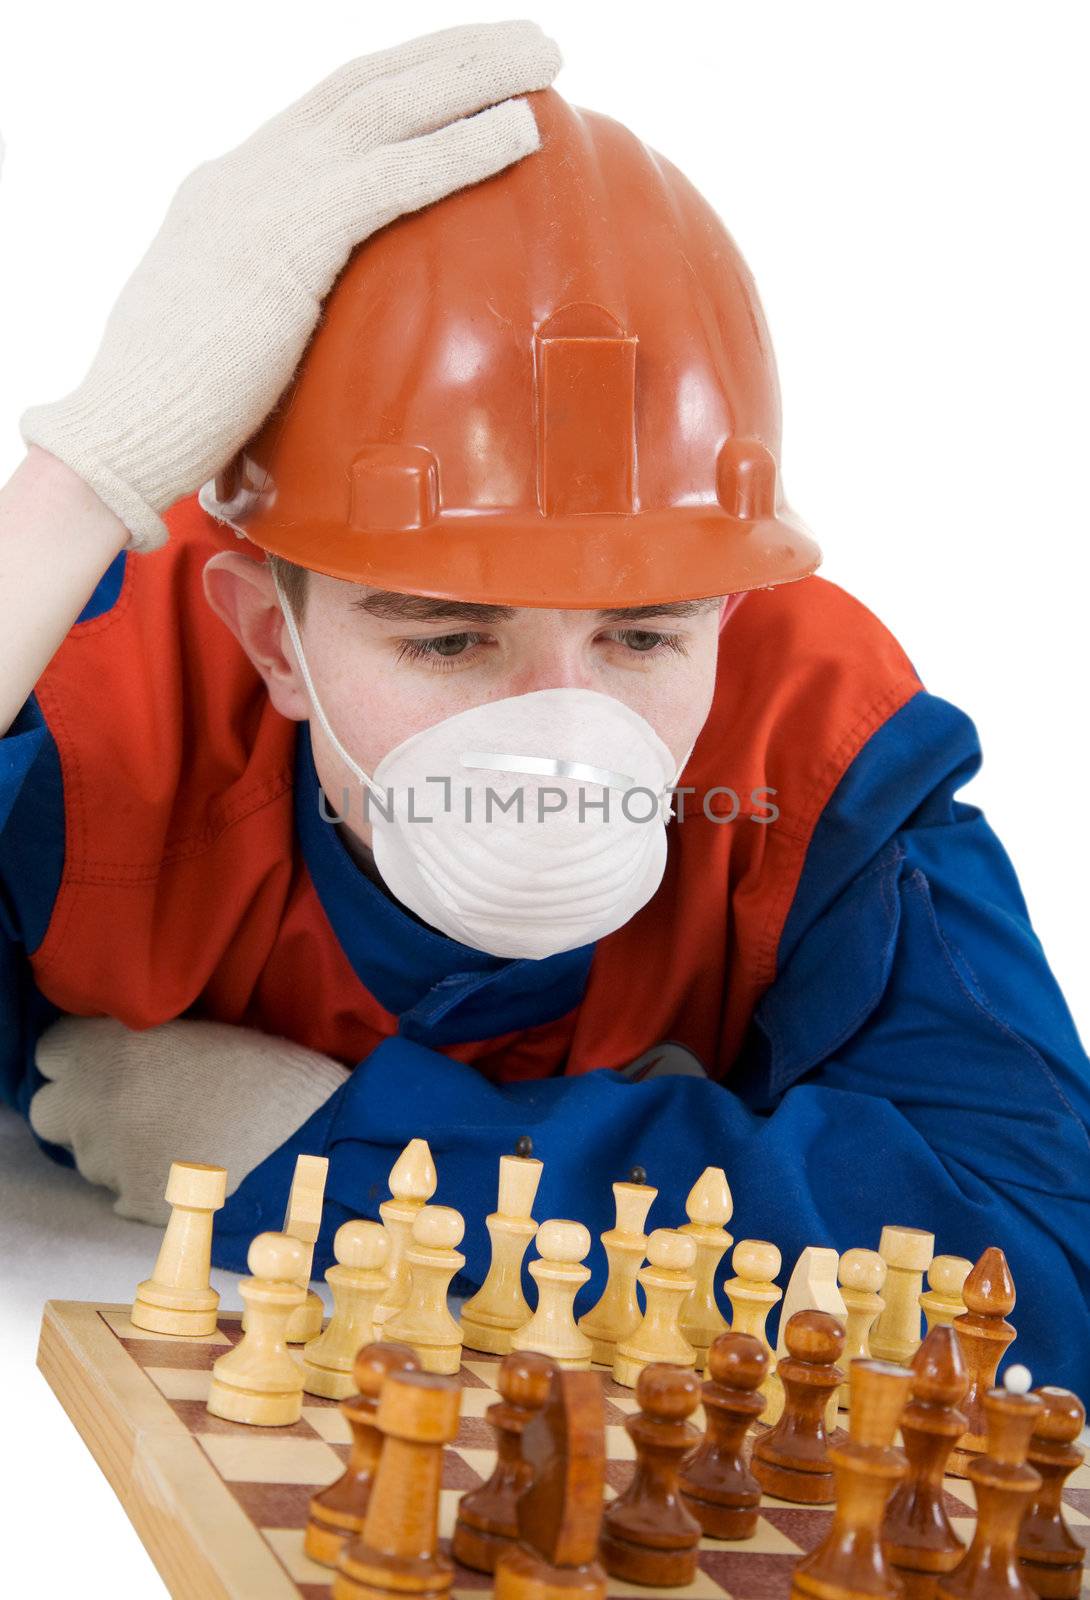 Labourer with chess  by pzaxe